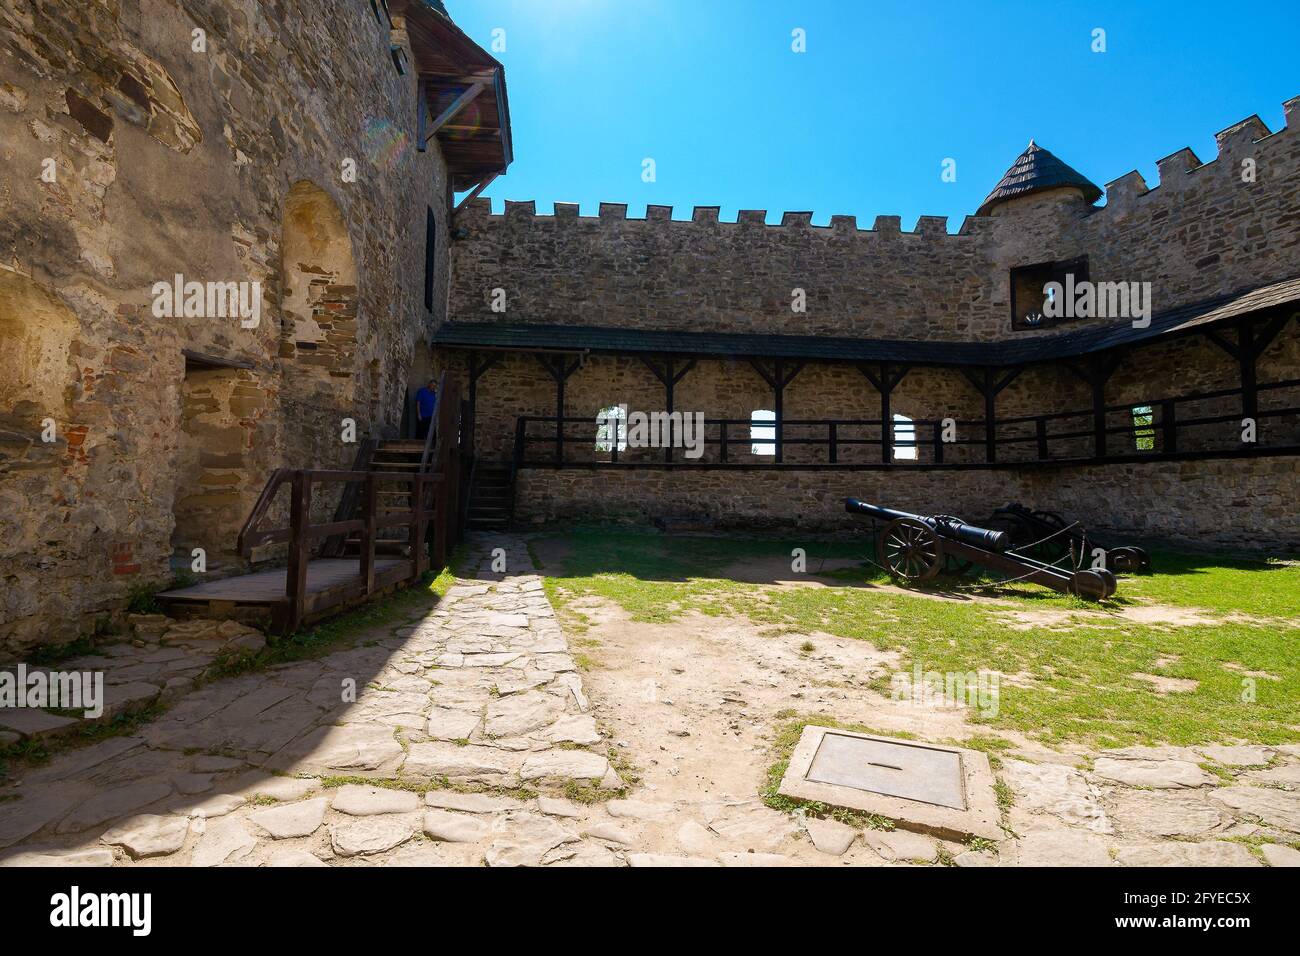 Stara Lubovna, Slovakia - 28 AUG 2016: ancient cannon in the inner courtyard of the castle. great stone walls of a fortrece. popular travel destinatio Stock Photo